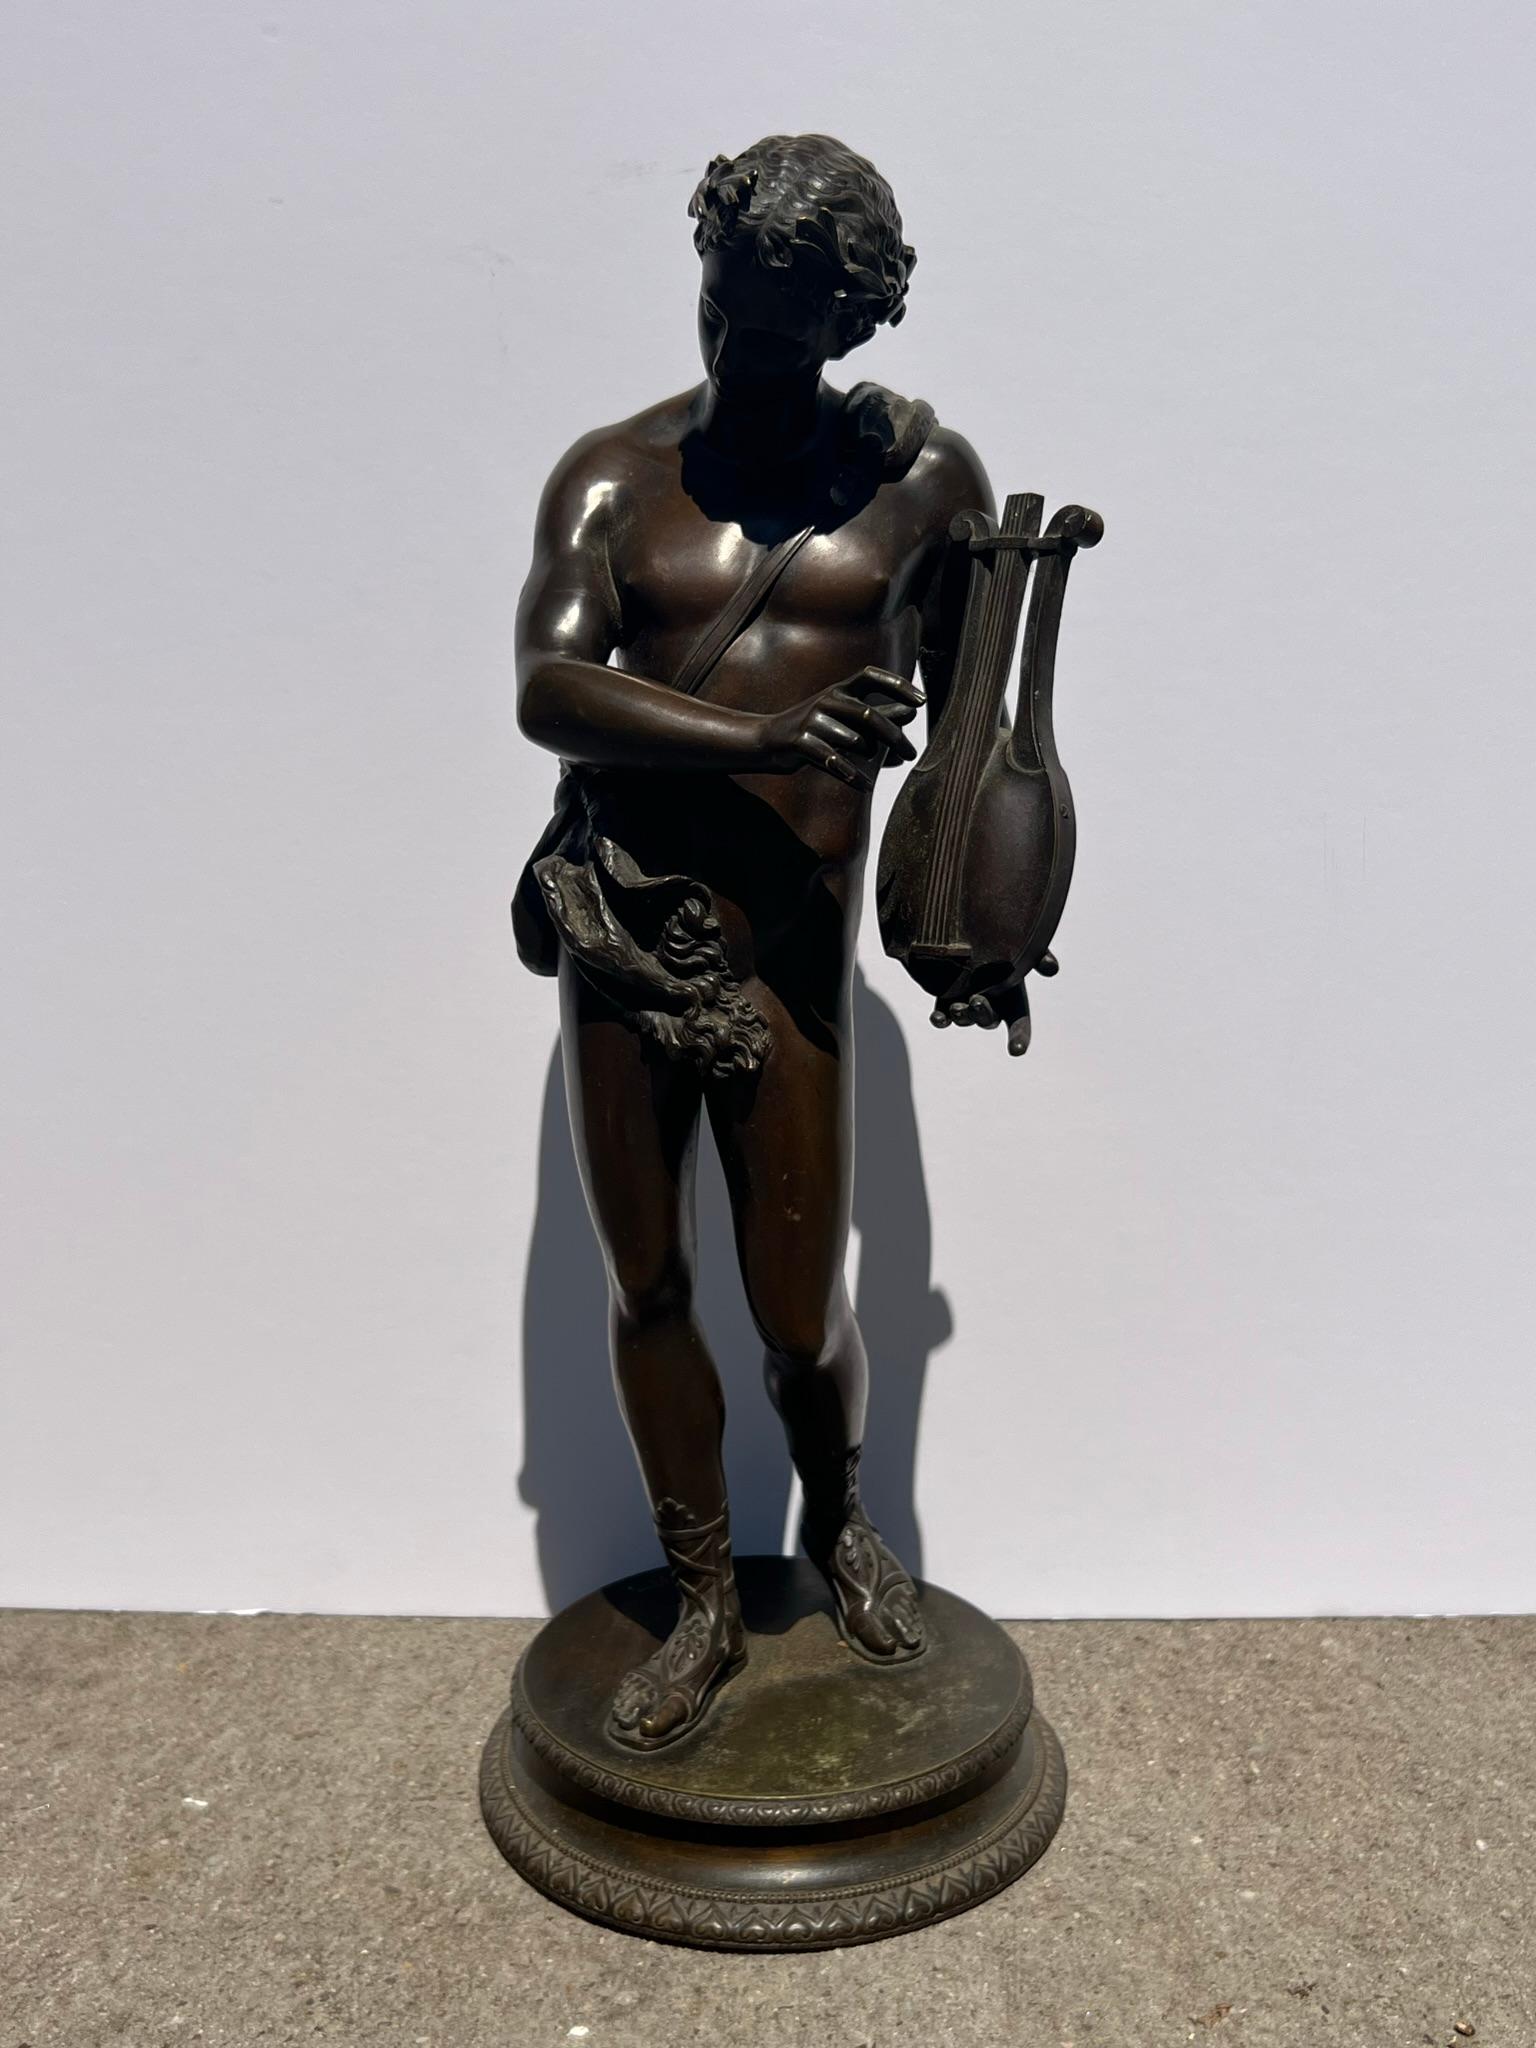 For sale is the great looking large male nude bronze sculpture of Orpheus by German Artist Professor George Mattes (1874-1945). Orpheus is seen along with his lyre and draped cape. This piece is signed to it base.

Patinated bronze
Germany ca. 1900.